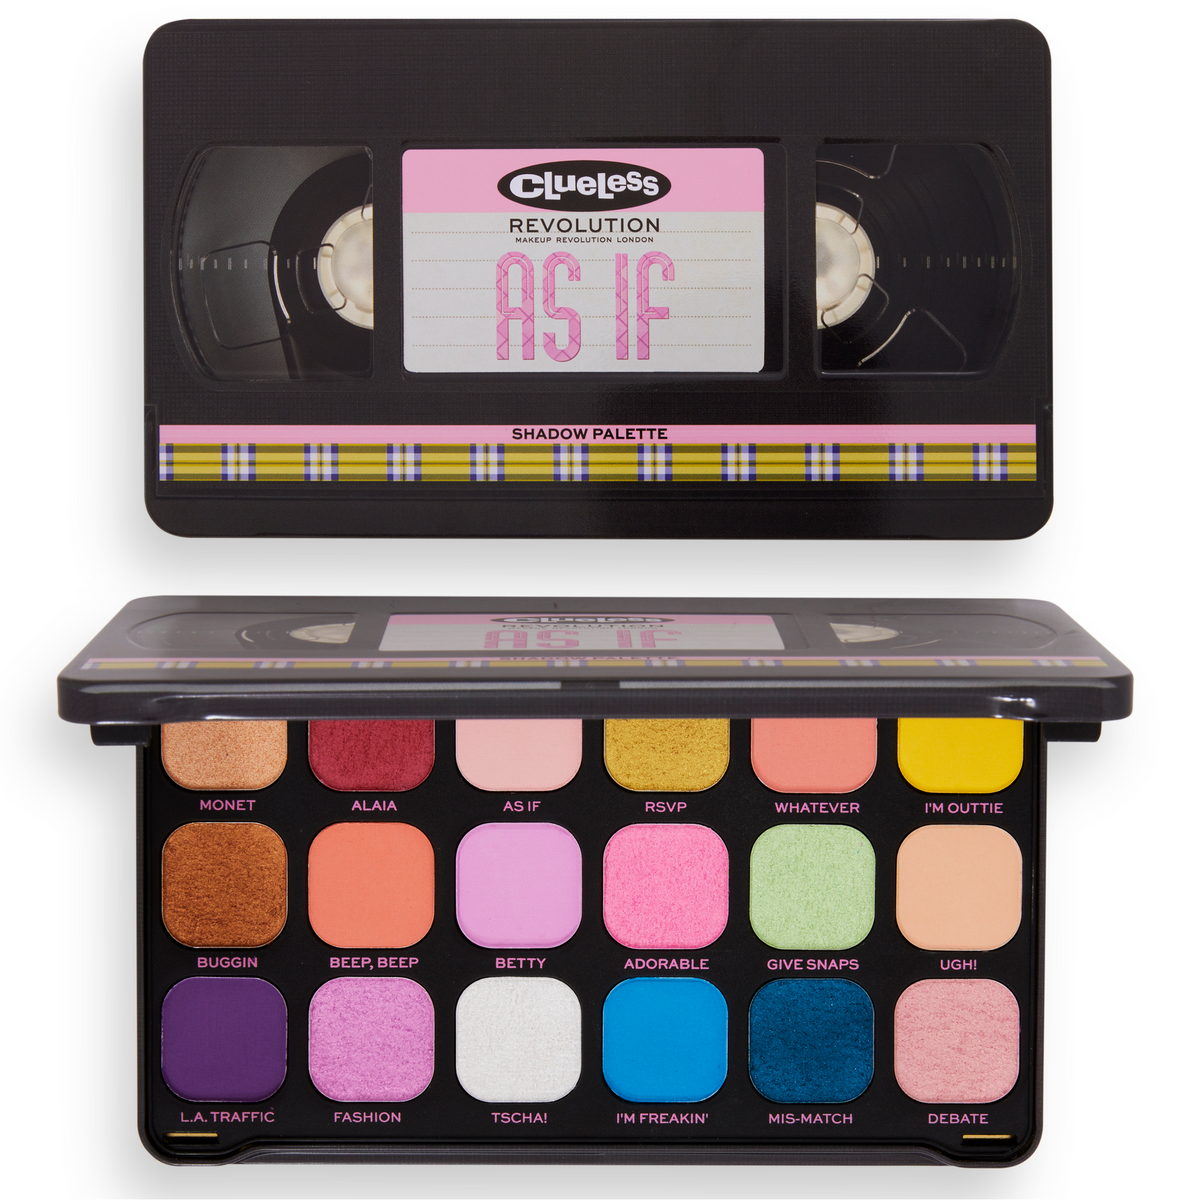 MAKEUP REVOLUTION X Clueless VCR As If Forever Flawless Eyeshadow Palette